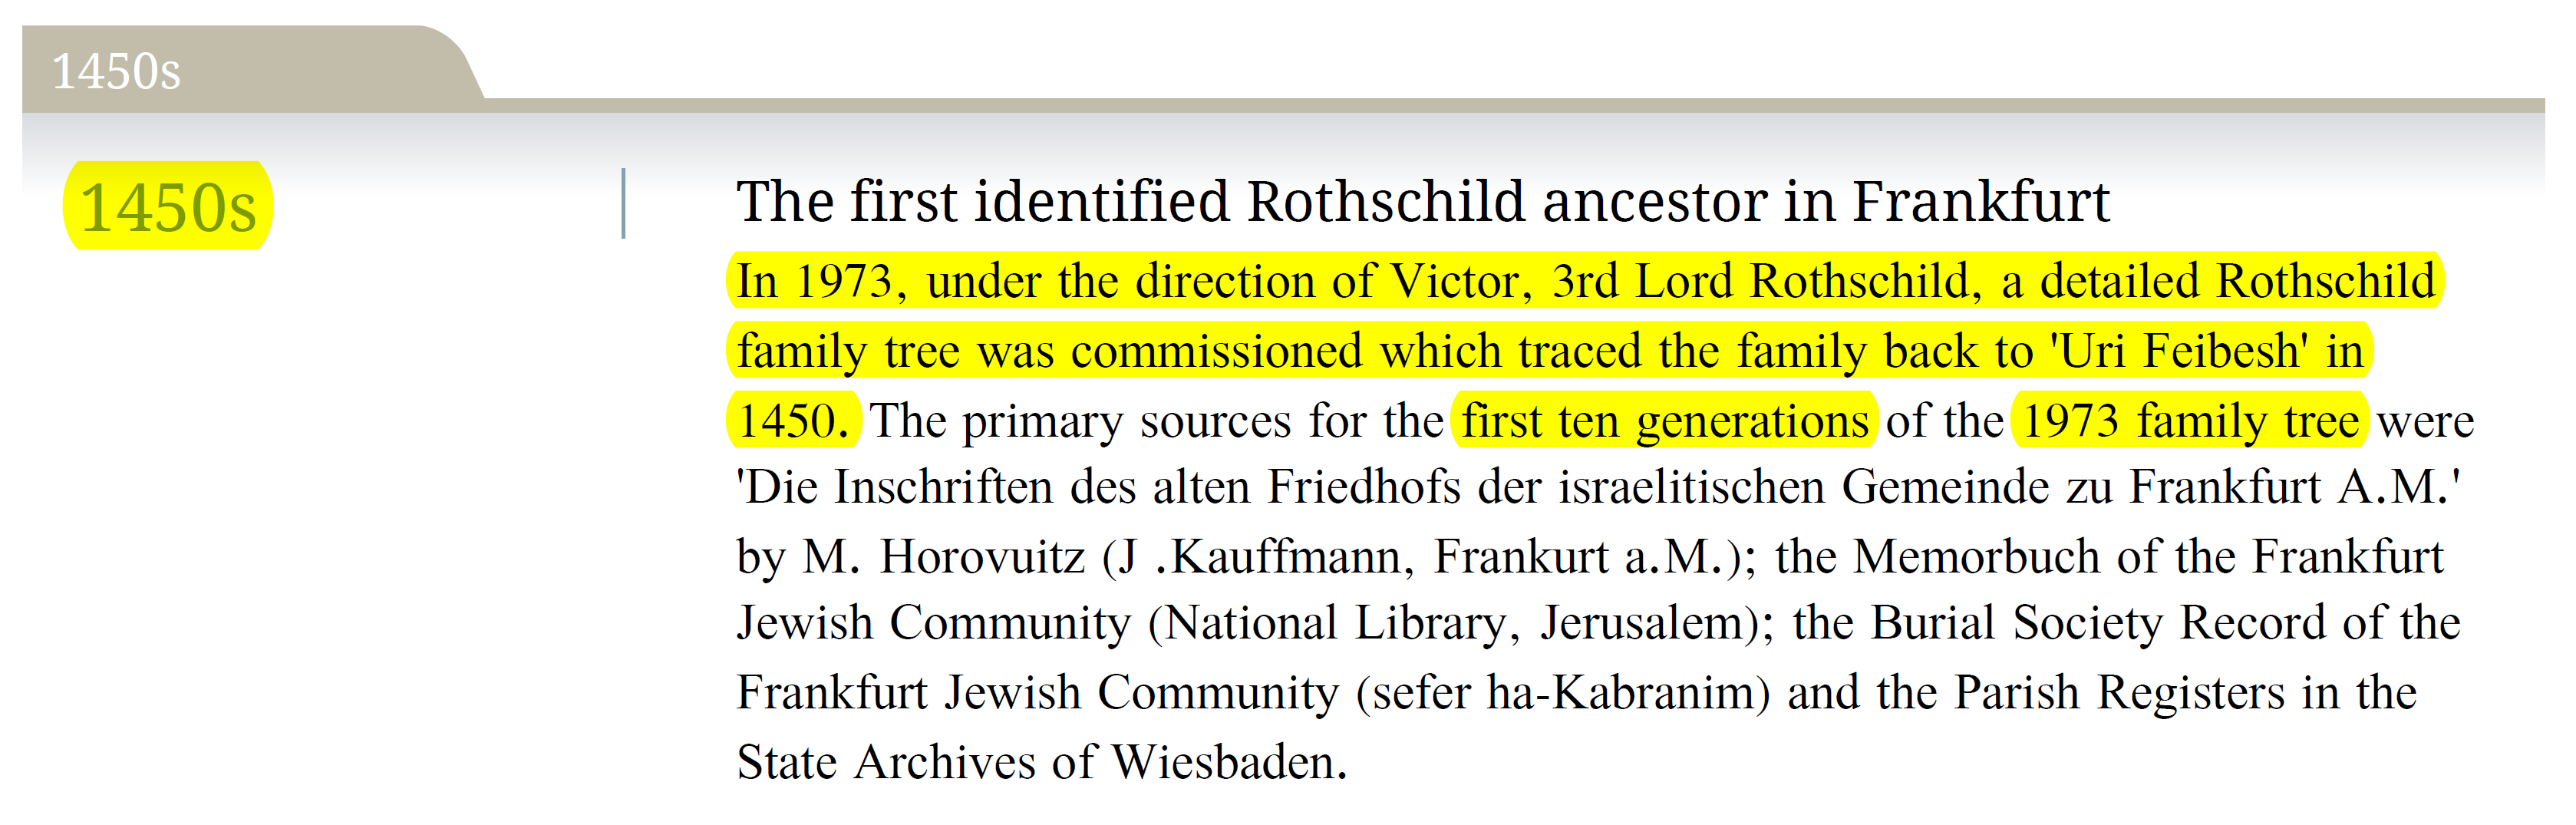 Rothschild Timeline, 1450s. (Accessed Feb. 16, 2022). Chronology c. 1450 to the present day. The Rothschild Archive.